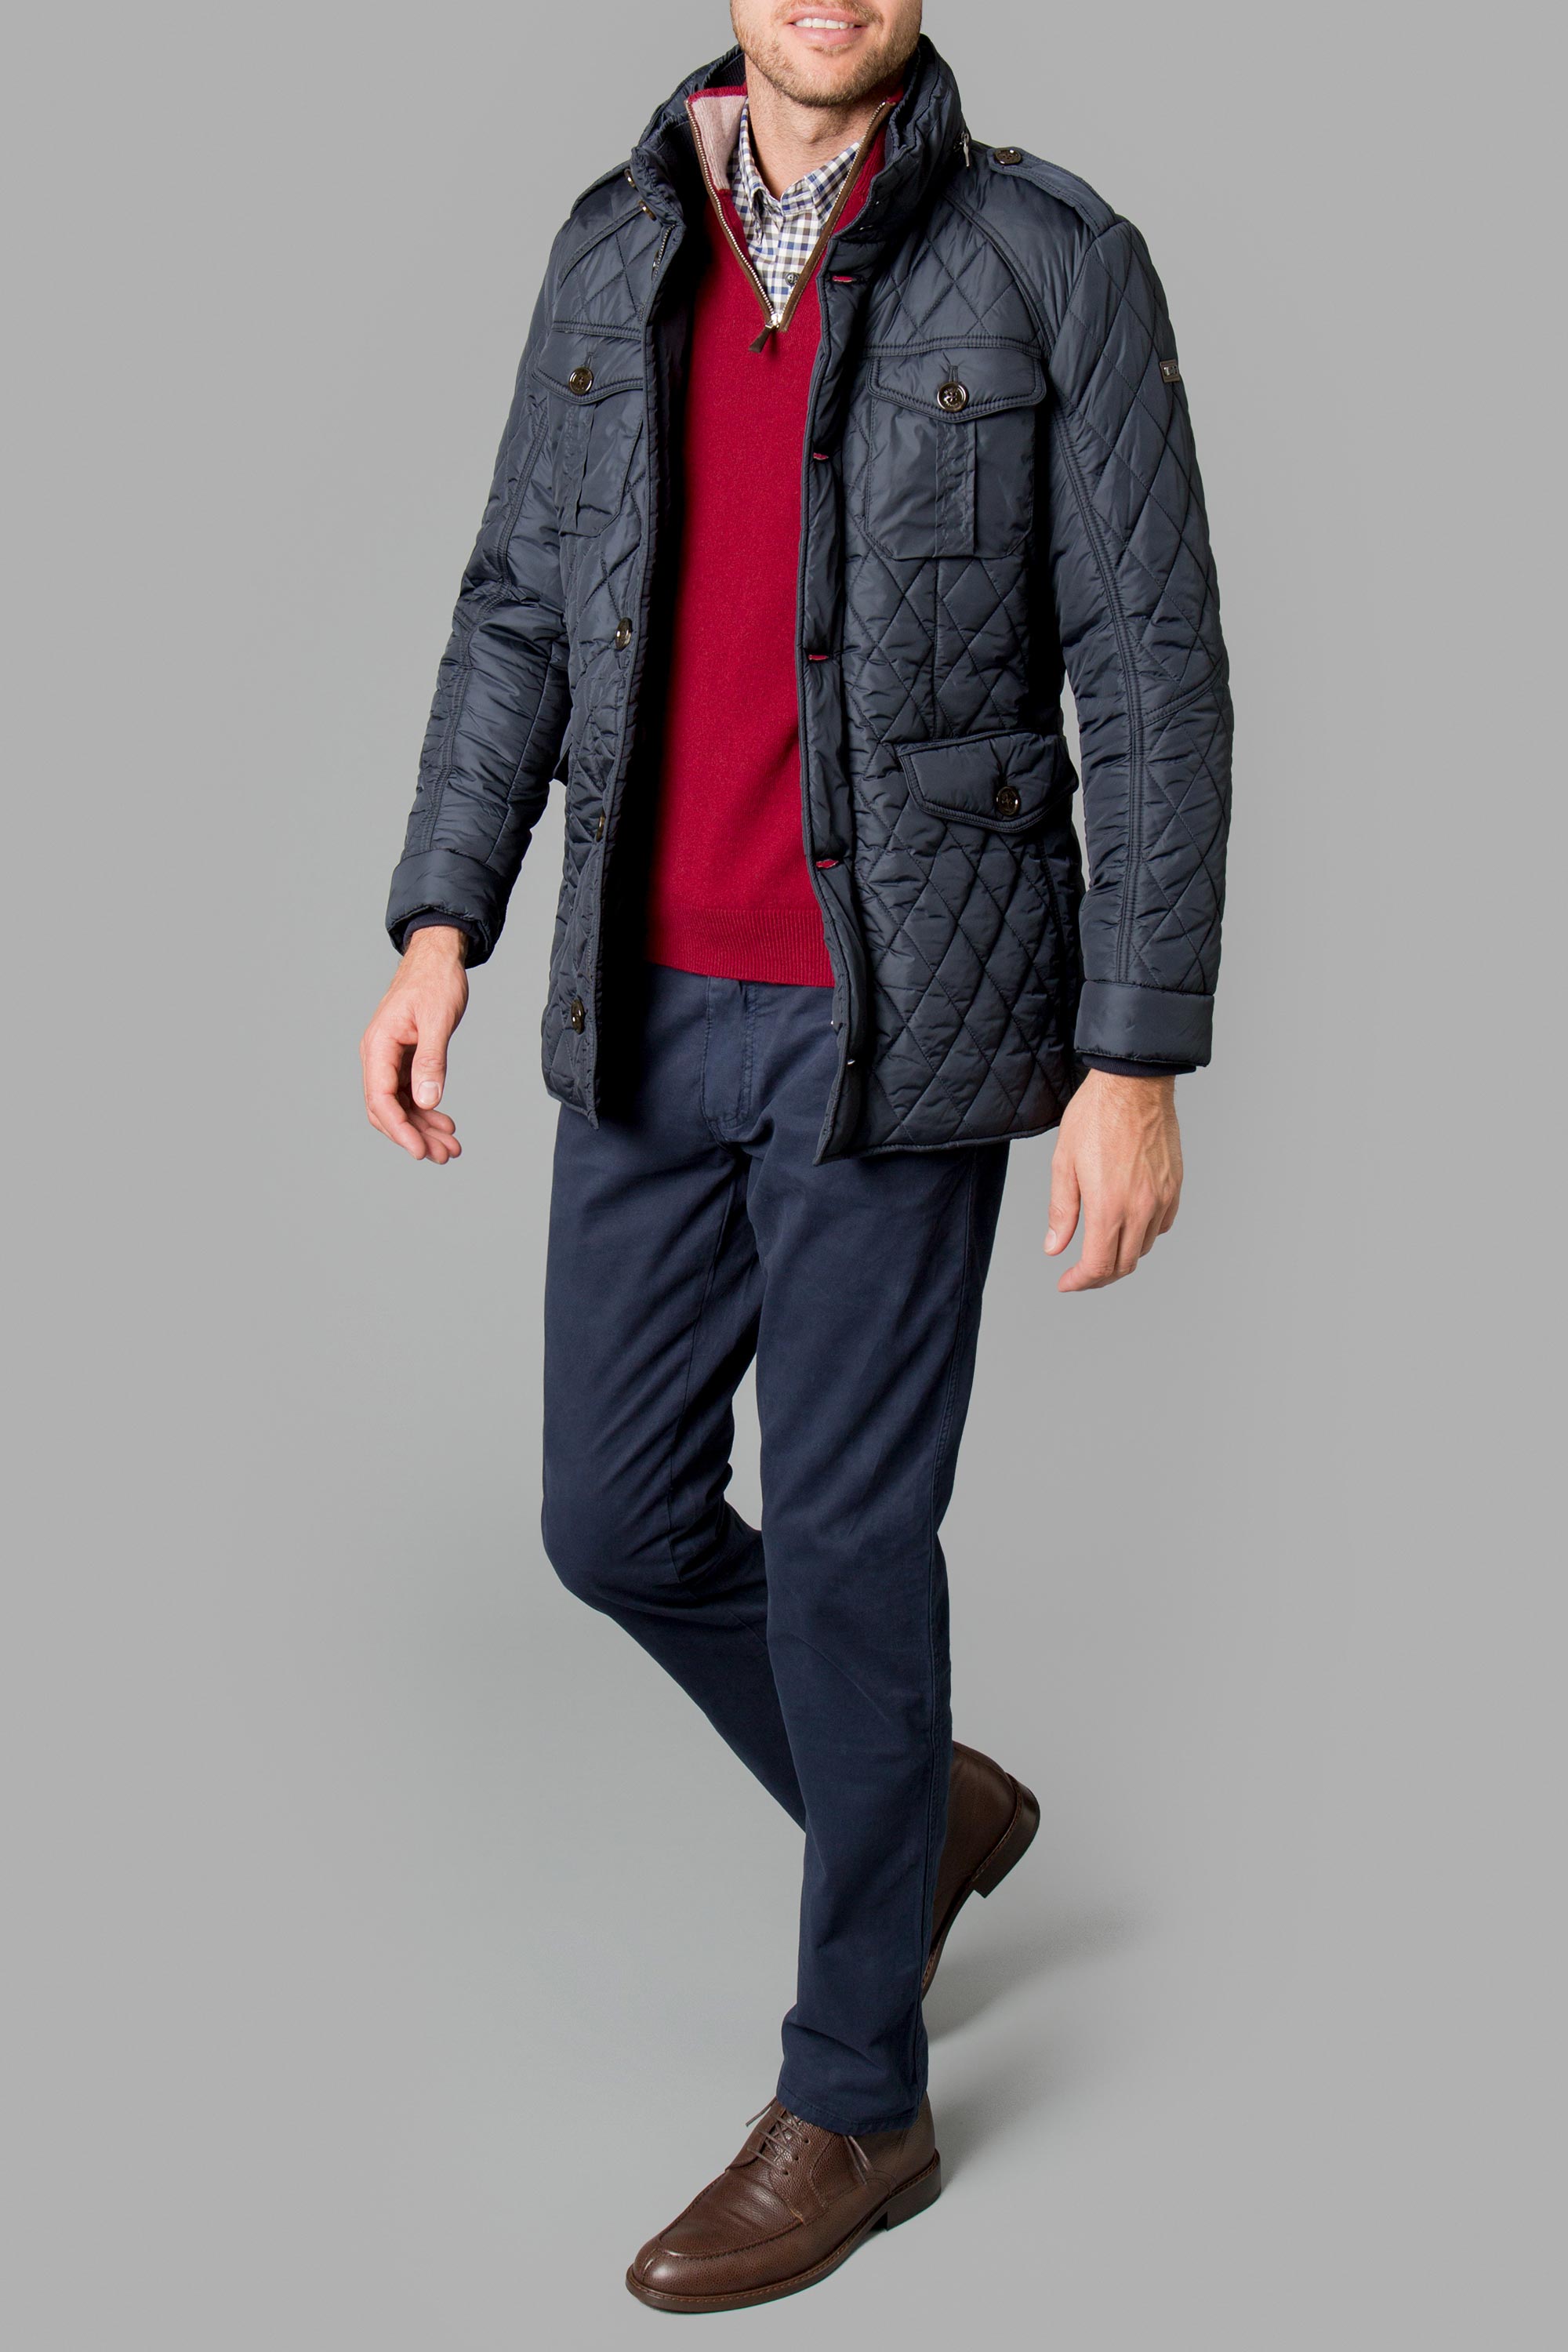 hacket jackets - you pay more but get the style and detailing inside